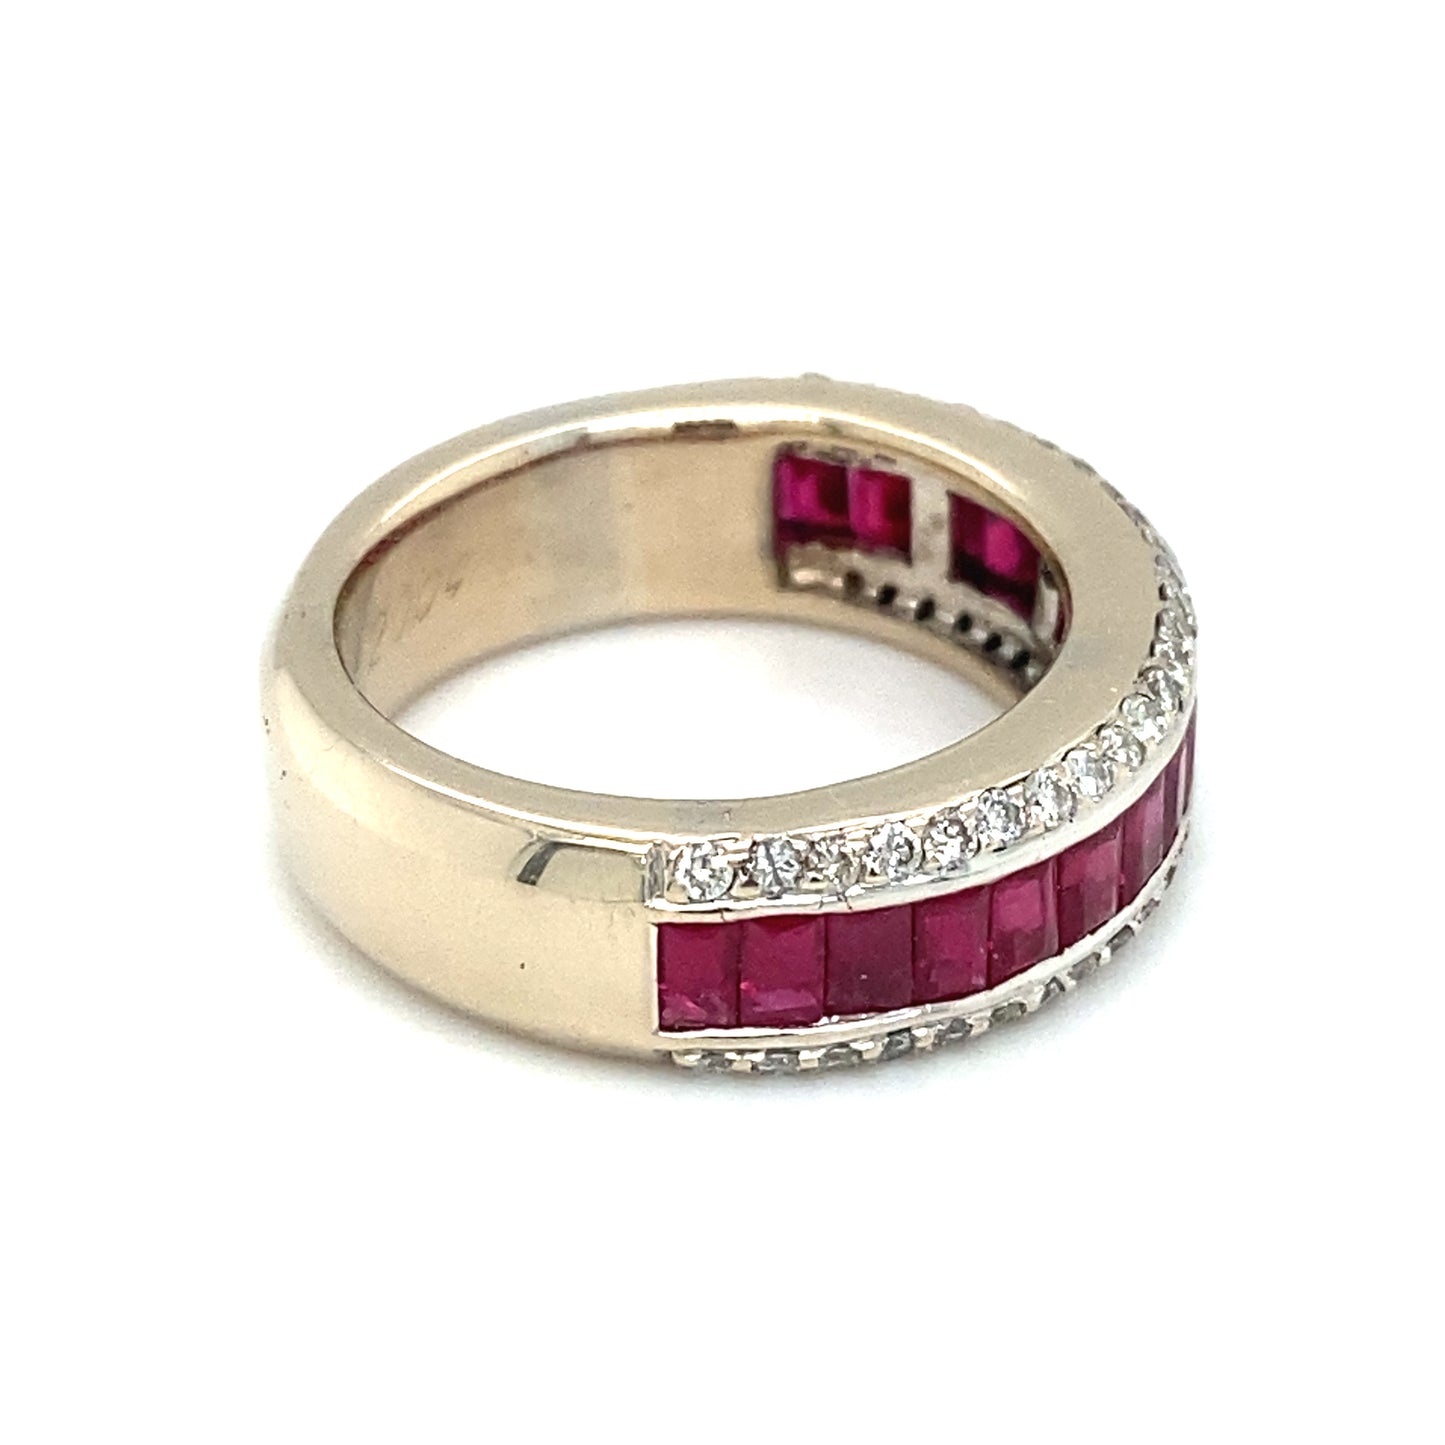 Circa 2000s Ruby and Diamond Band Ring in 18K White Gold